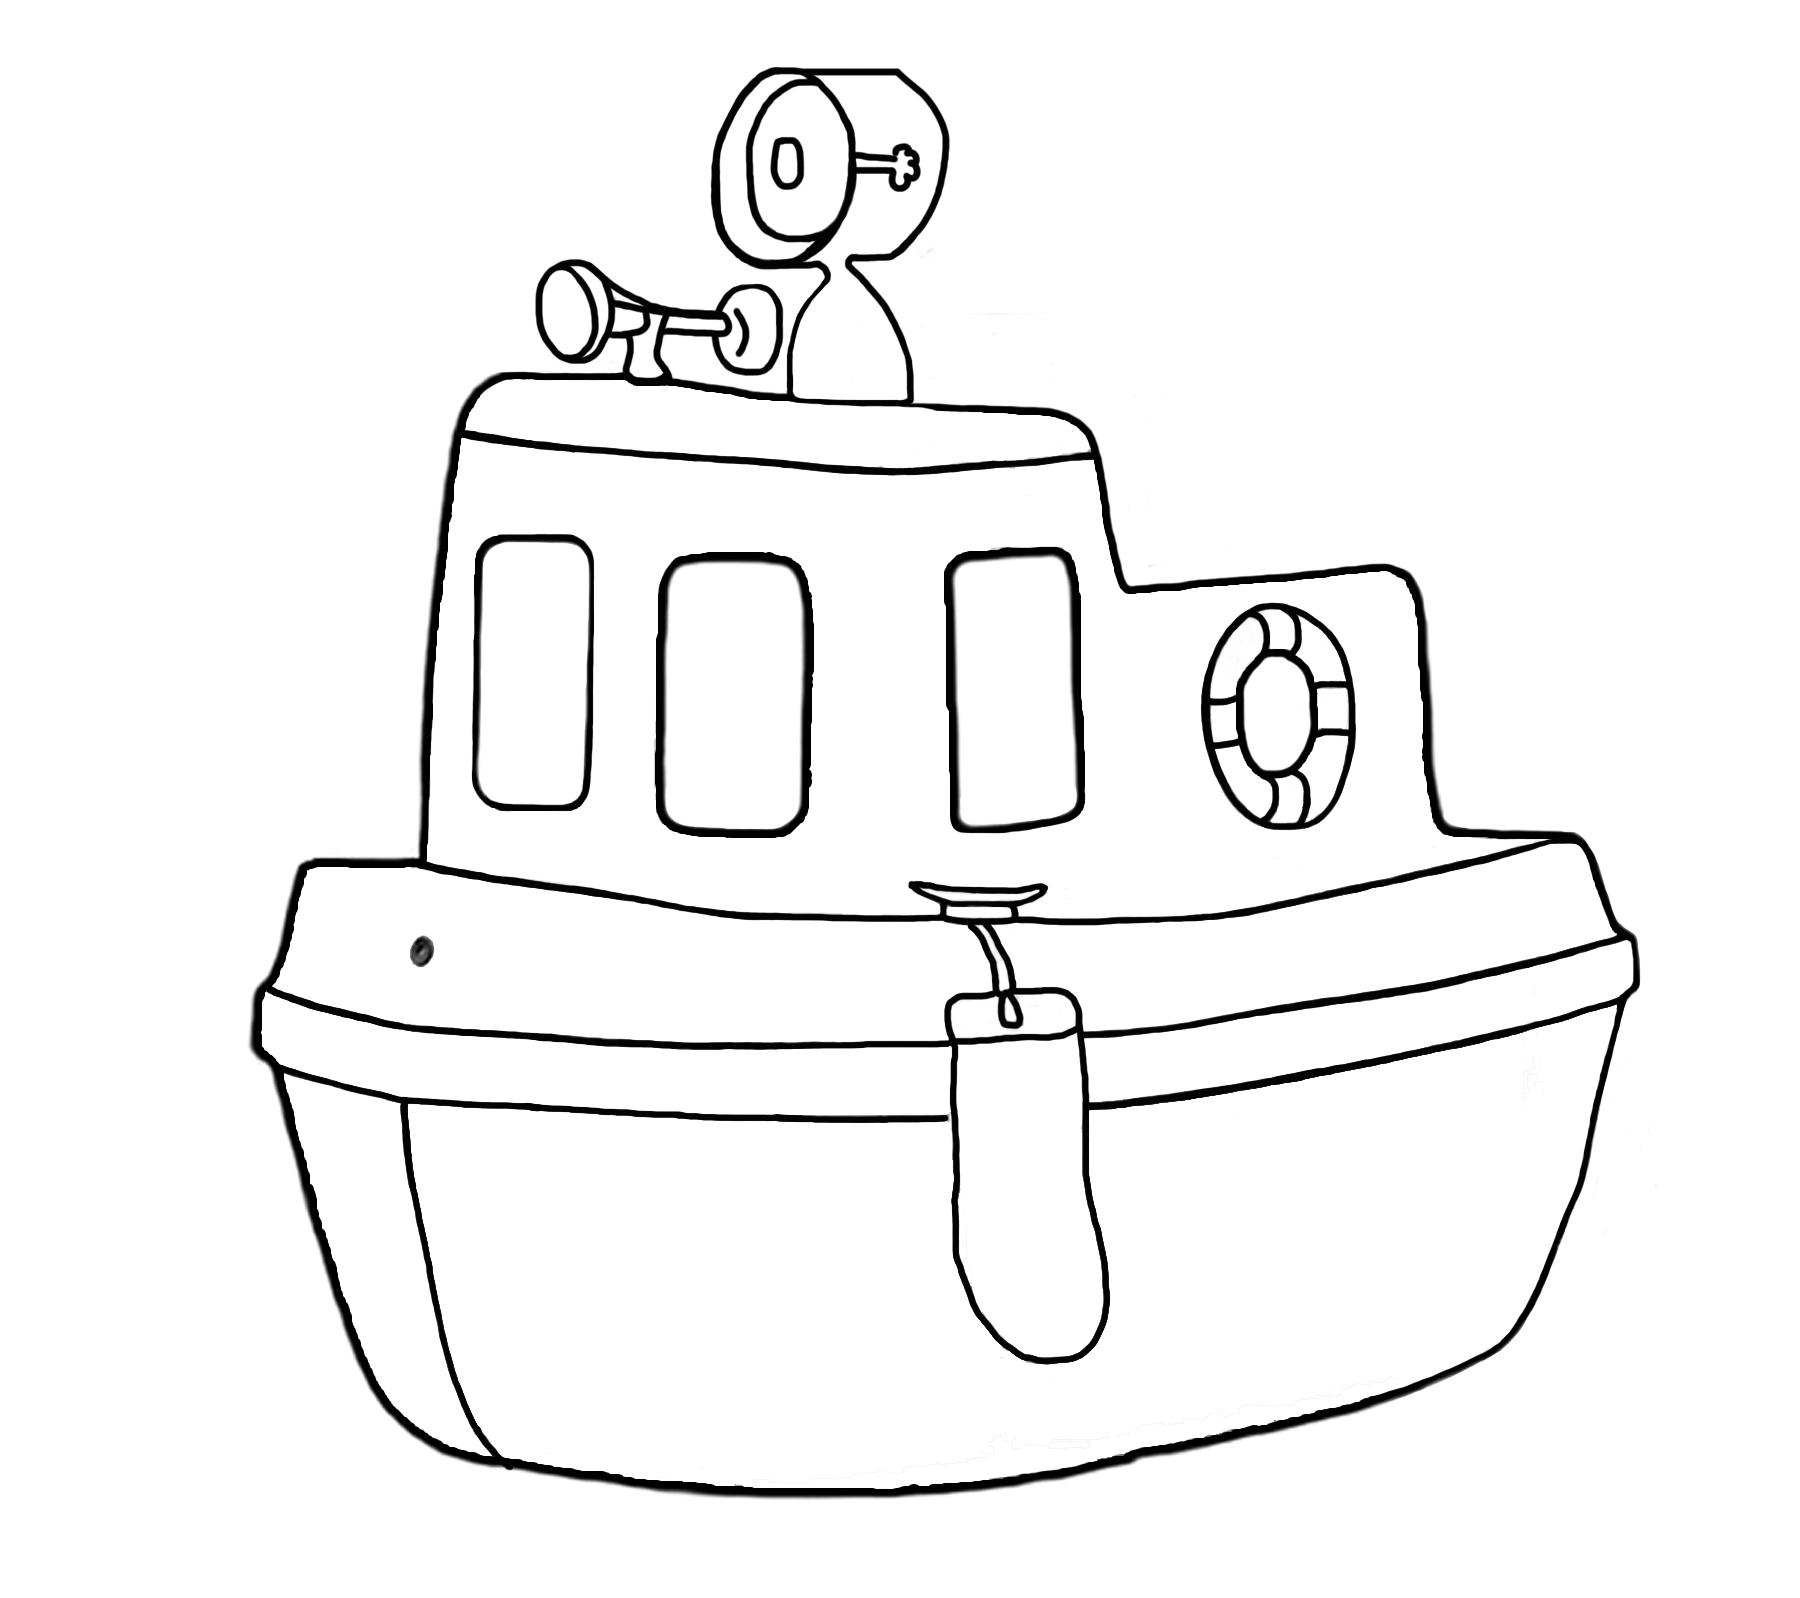 Pin Tugboat Clipart Black And White #8 - Tugboat Black And White, Transparent background PNG HD thumbnail